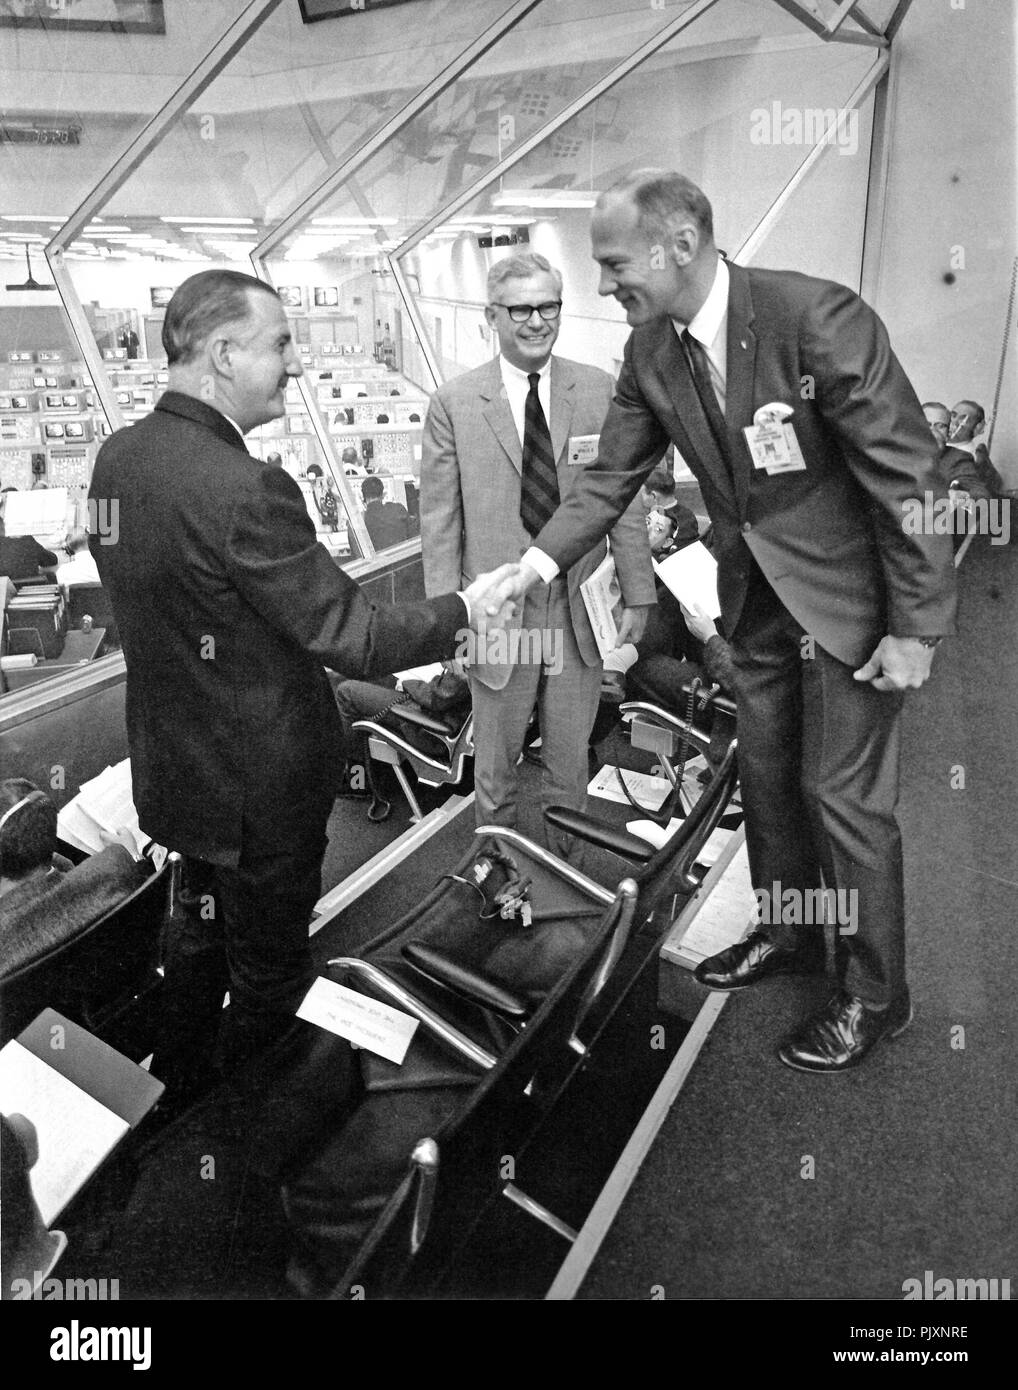 Cape Canaveral, FL - (FILE) -- Apollo 11 Lunar Module (LM) pilot Edwin E. 'Buzz' Aldrin, Jr., right, who is scheduled to make a lunar landing with Neil A. Armstrong (not pictured) greets United States Vice President Spiro T. Agnew, left, within the Spaceport's Launch Control Center on March 3, 1969.  Looking on from center is Dr. Robert Seamans, Secretary of the Air Force and former National Aeronautics and Space Administration (NASA) Deputy Administrator.  Earlier the three men viewed the launch of Apollo 9. Credit: NASA via CNP /MediaPunch Stock Photo